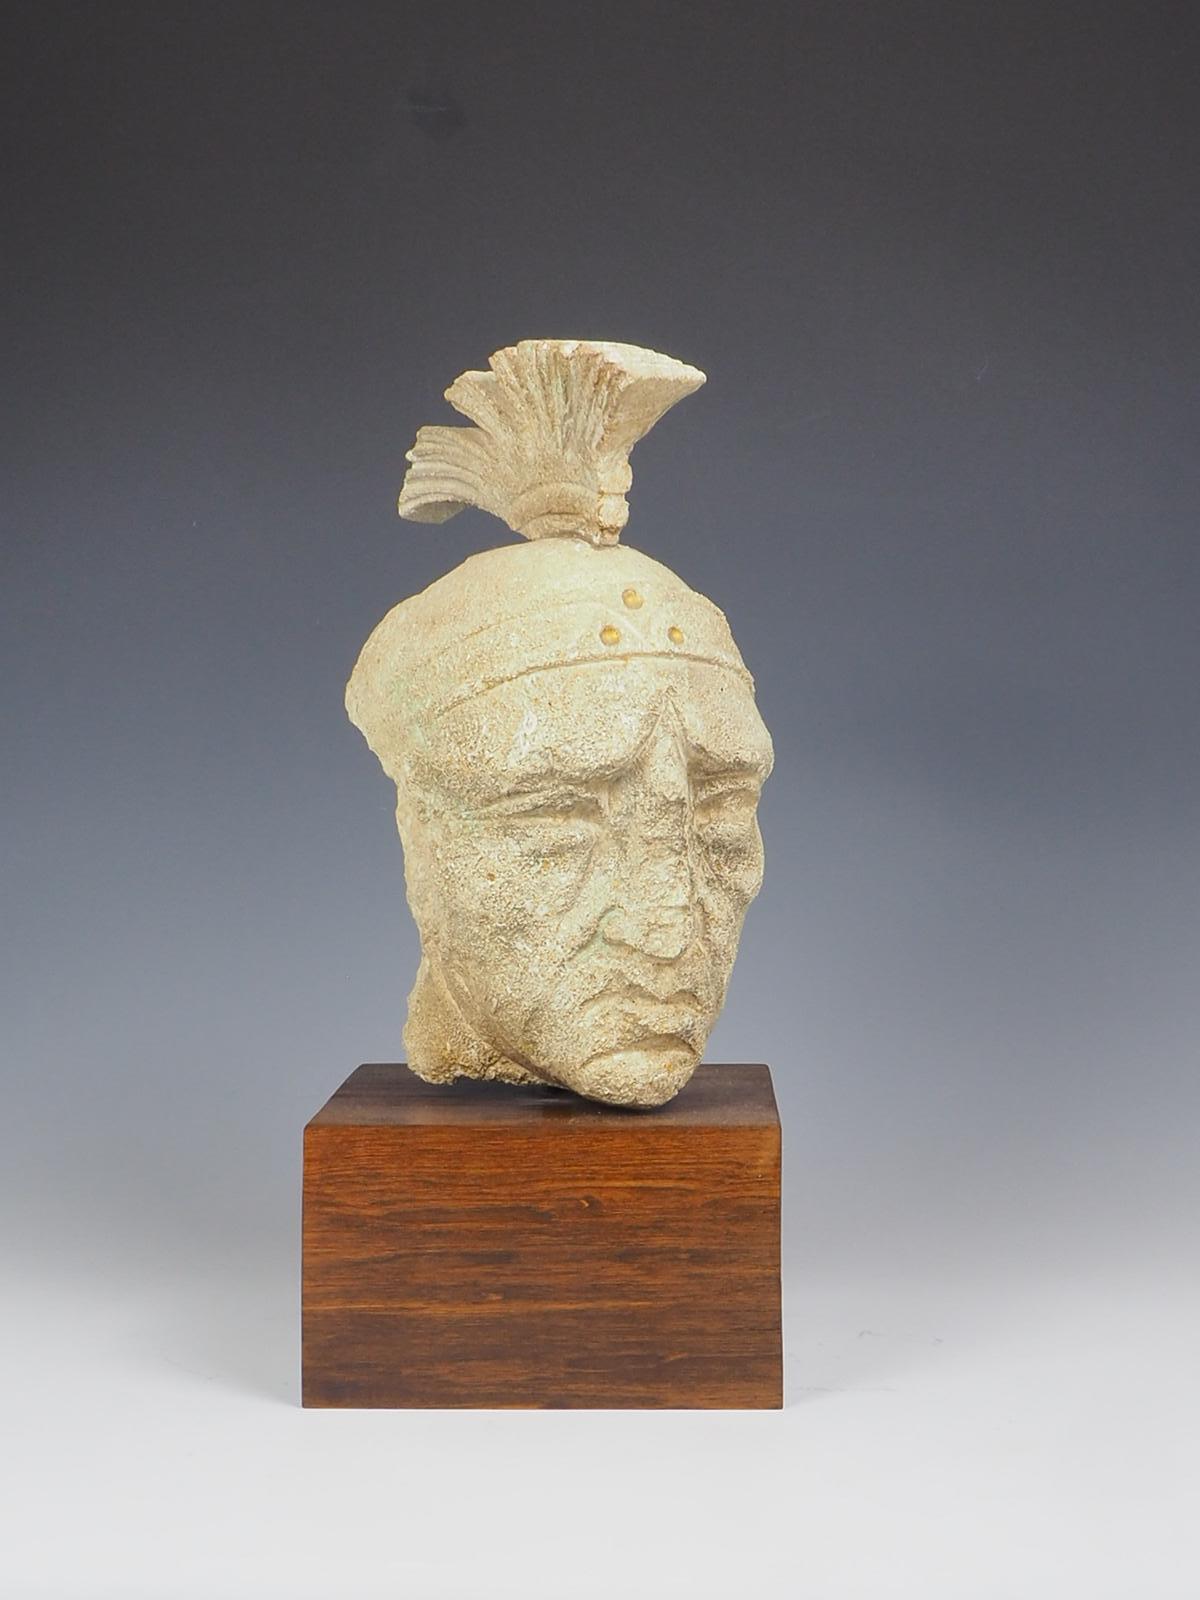 Antique Venetian Sandstone Head of a Roman Gladiator is a captivating piece of art that showcases the exquisite craftsmanship of the Venetian artisans. This stunning sculpture depicts the head of a Roman gladiator, capturing the strength and